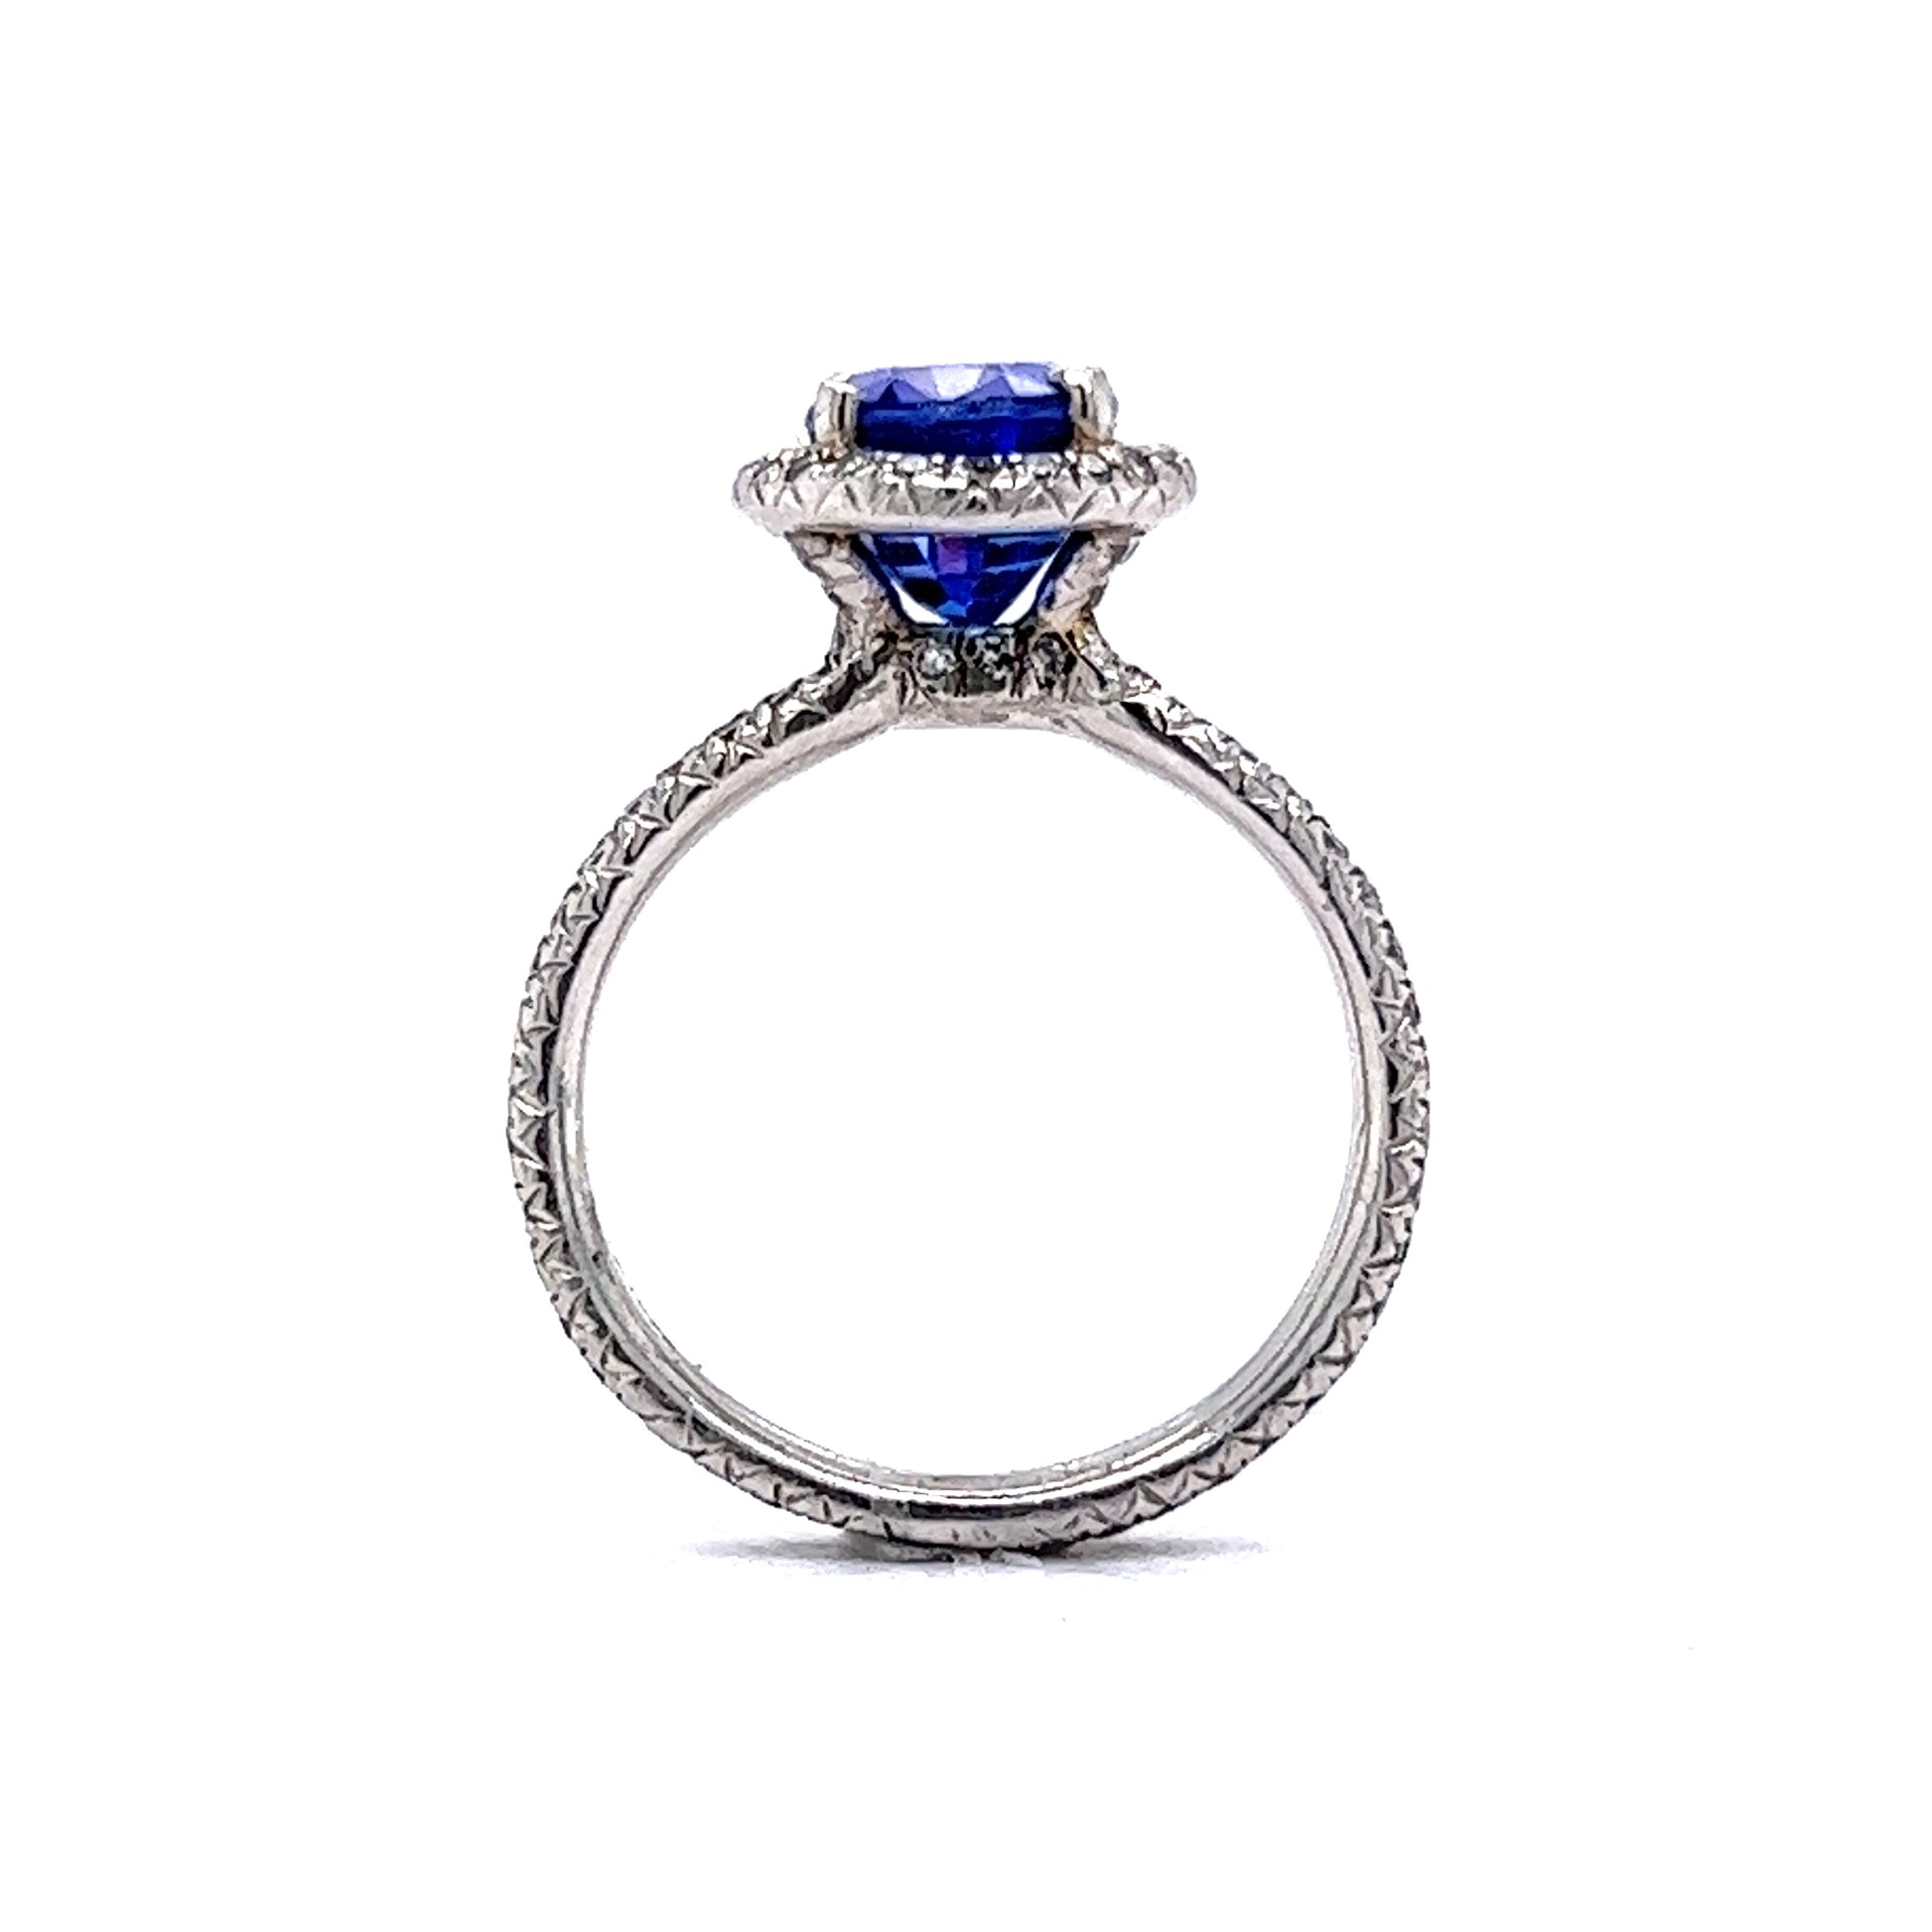 Oval Cut Tanzanite & Diamond Halo Ring in PlatinumComposition: PlatinumTotal Diamond Weight: .59 cttw ctTotal Gram Weight: 6.1 gInscription: FABRIKANT PT950